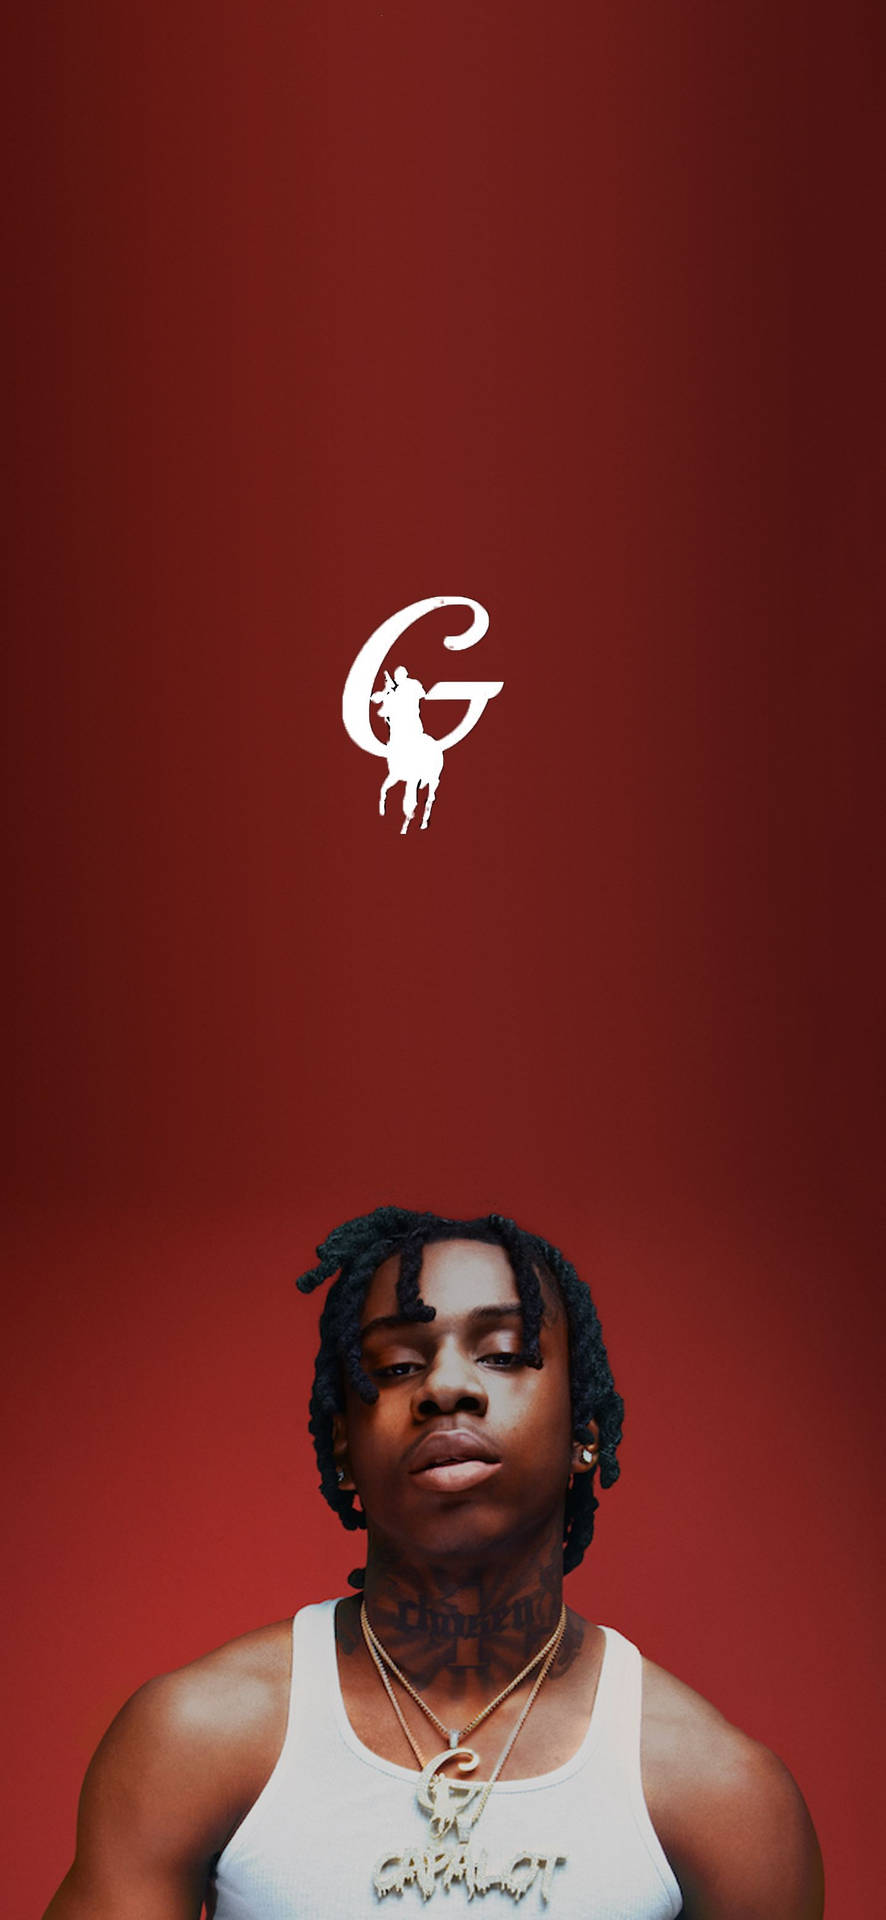 Polo G Red Aesthetic Background